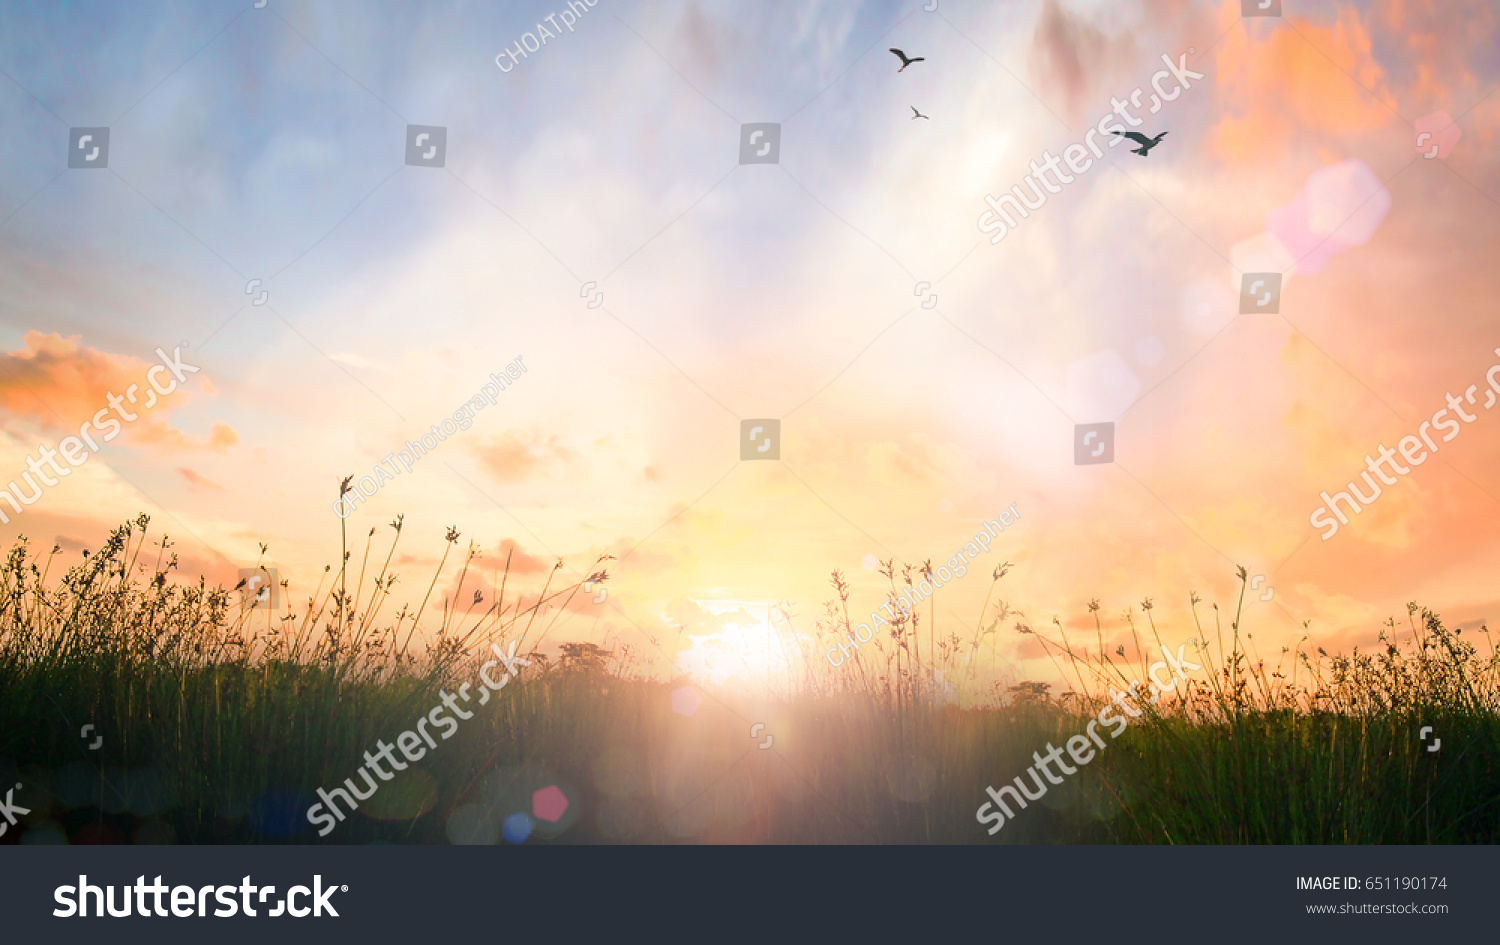 World environment day concept: Calm of country meadow sunrise landscape background #651190174